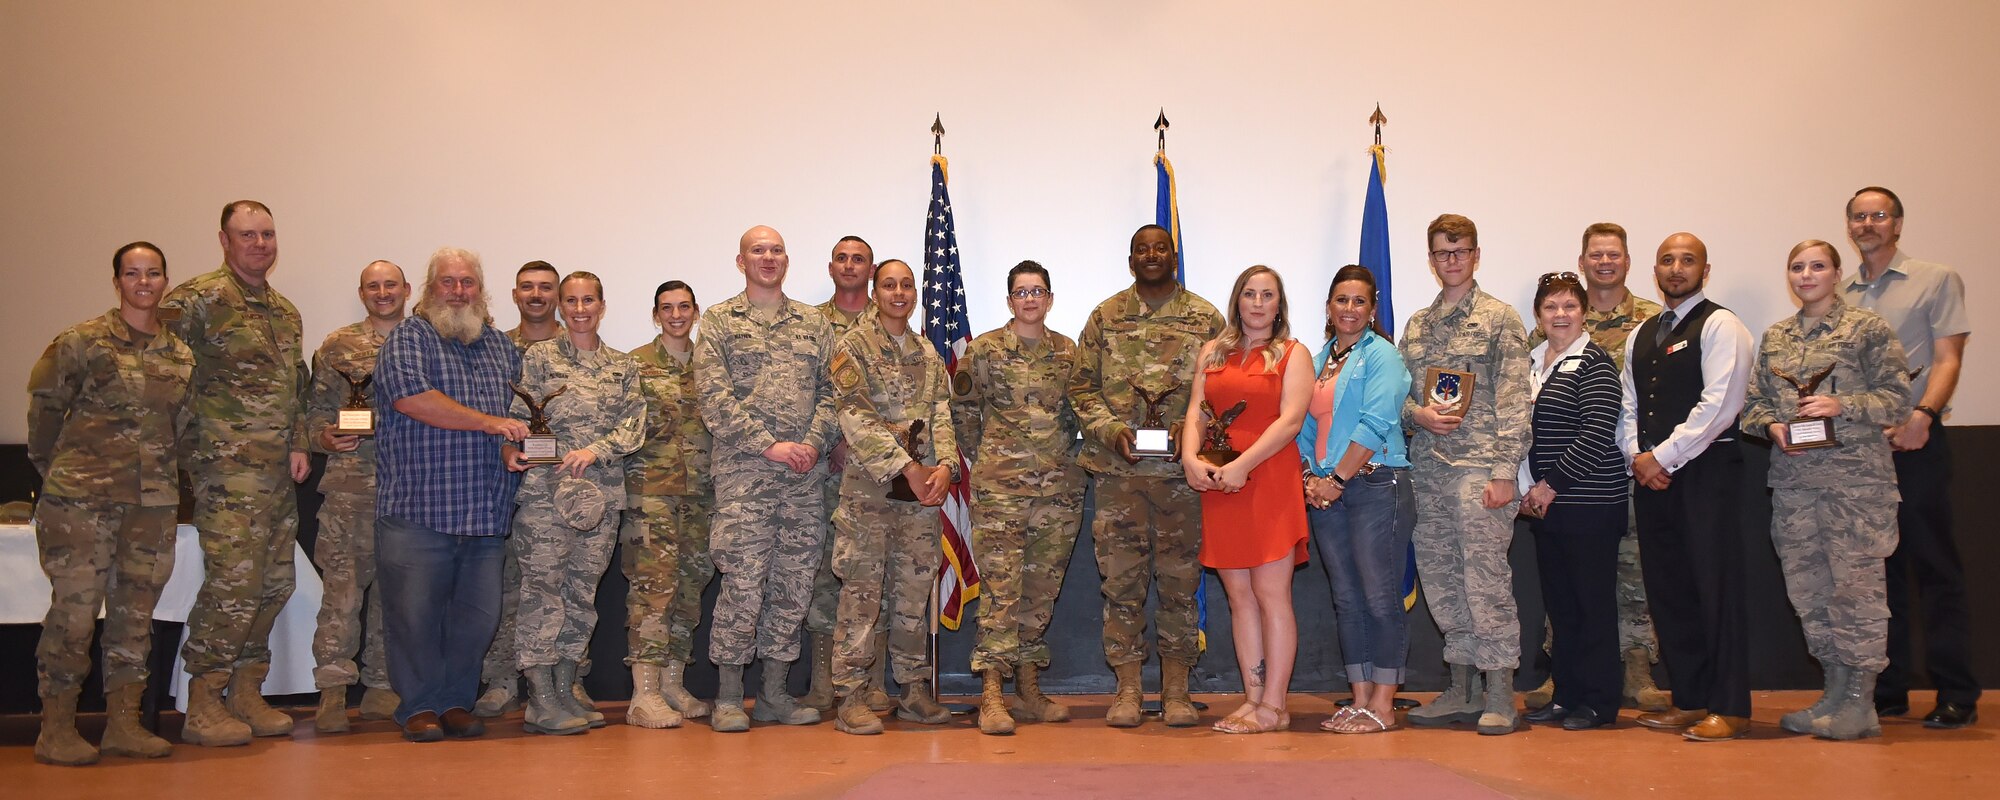 Col. Peter Bonetti, 90th Missile Wing commander, and Chief Master Sgt. Tiffany Bettisworth, 90th Missile Wing command chief, pose with the wing’s second quarter award winners at F.E. Warren Air Force Base, Wyo., Aug. 2, 2019. The wing held a celebration for all the nominees and presented the awards to the winners during a ceremony. (U.S. Air Force photo by Glenn S. Robertson)